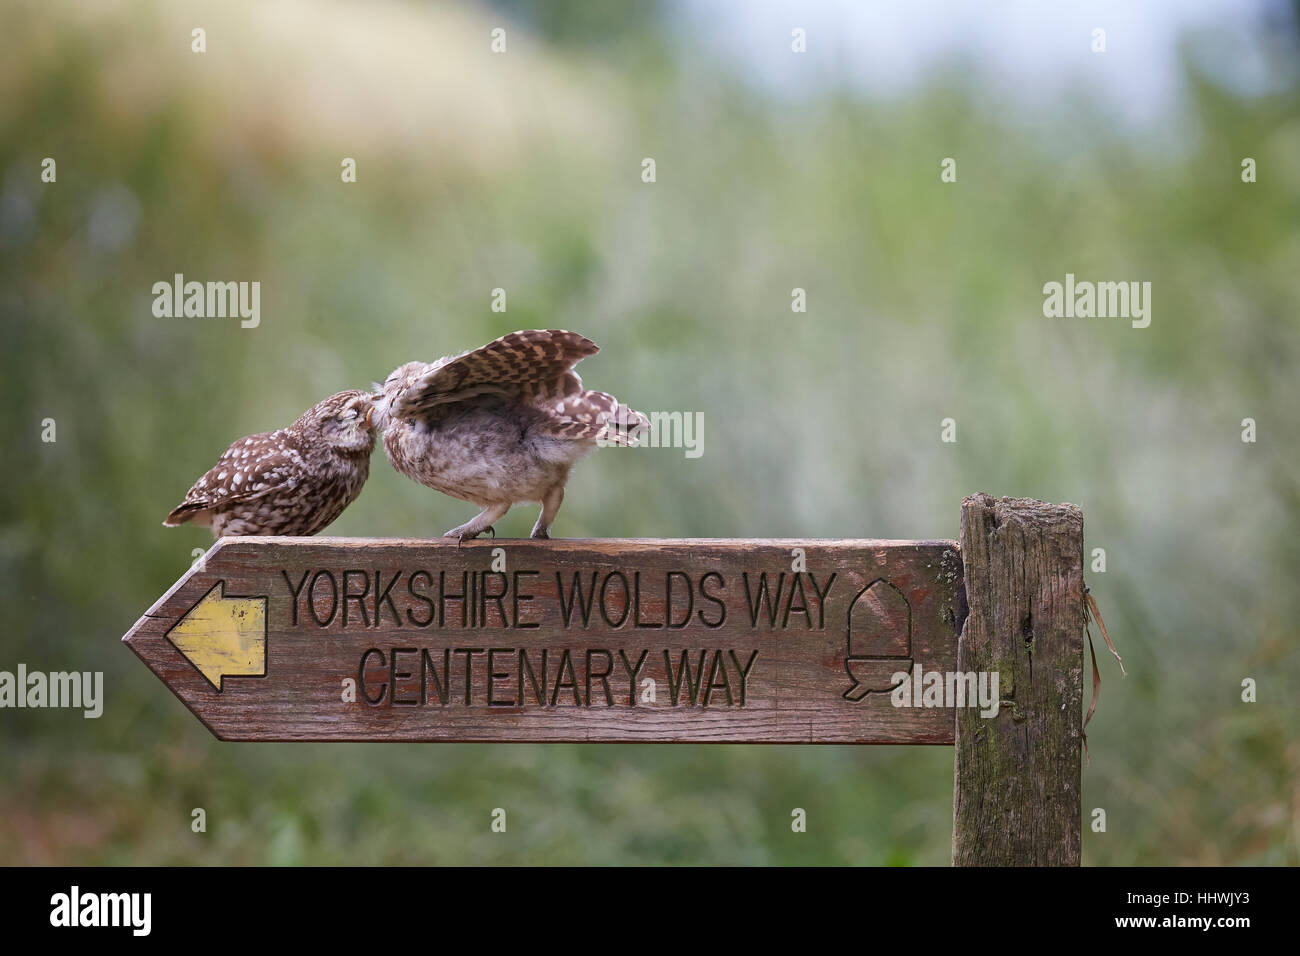 Little Owl, Athene noctua, feeding owlet perched on a Yorkshire Wolds Way Centenary Way wooden sign post, East Yorkshire, UK. Stock Photo